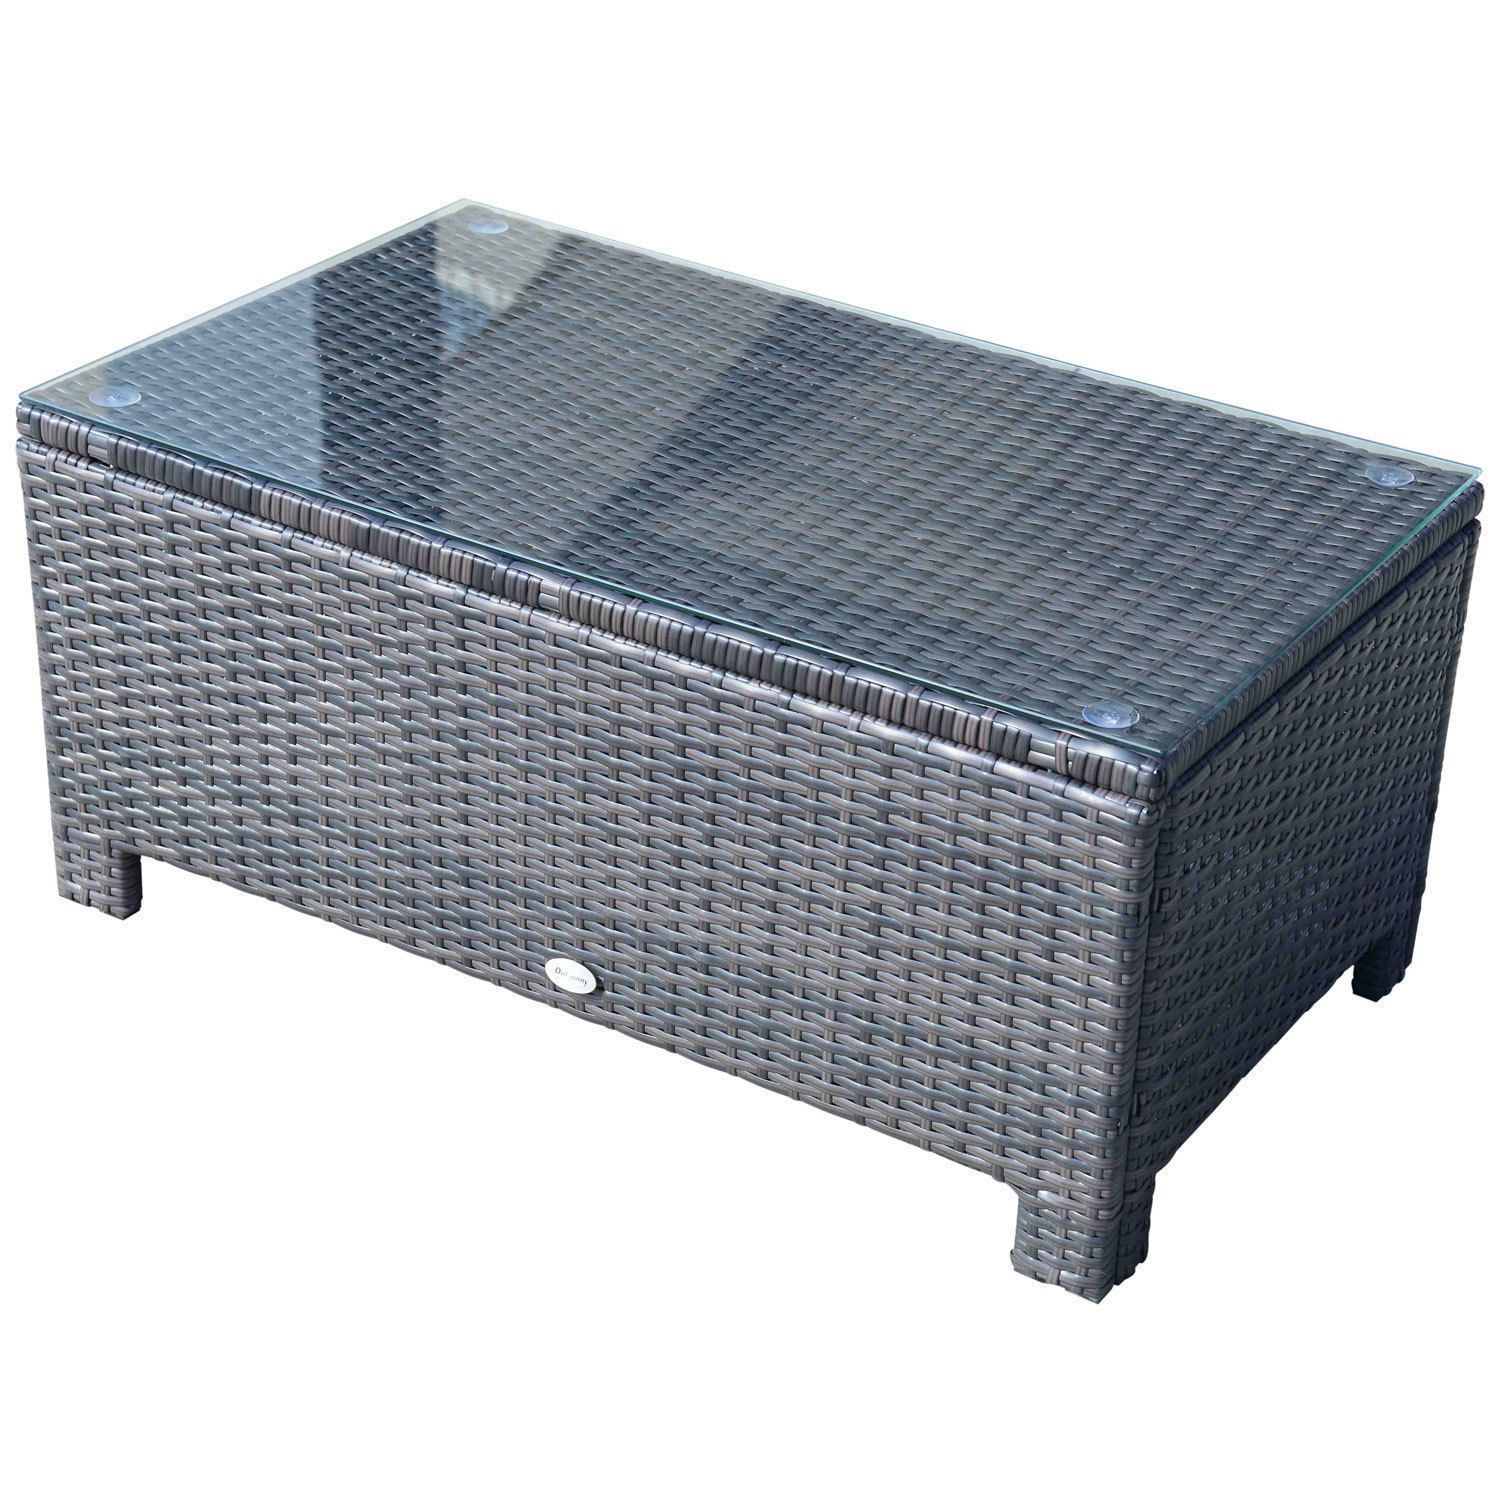 Rattan Outdoor Garden Furniture Weave Wicker Coffee Table – Black/grey For 4pcs Rattan Patio Coffee Tables (Gallery 19 of 20)